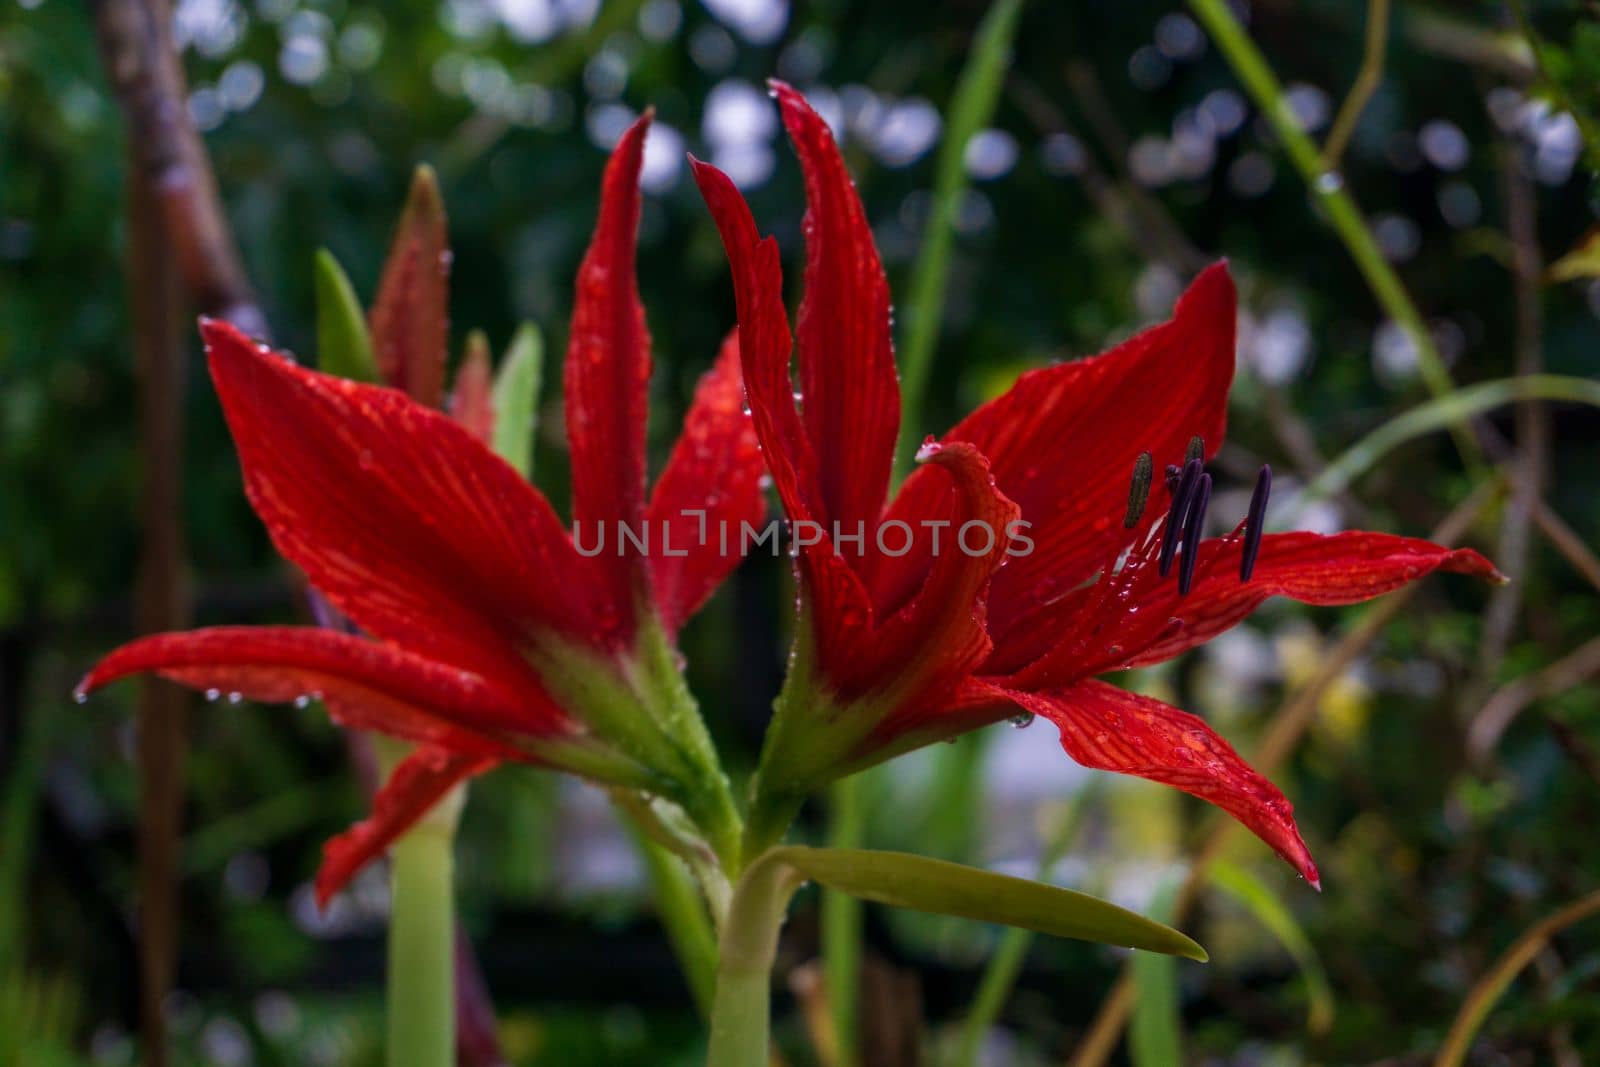 Huge bright red lily flower Amaryllis in the garden with water drops on the petals by Challlenger